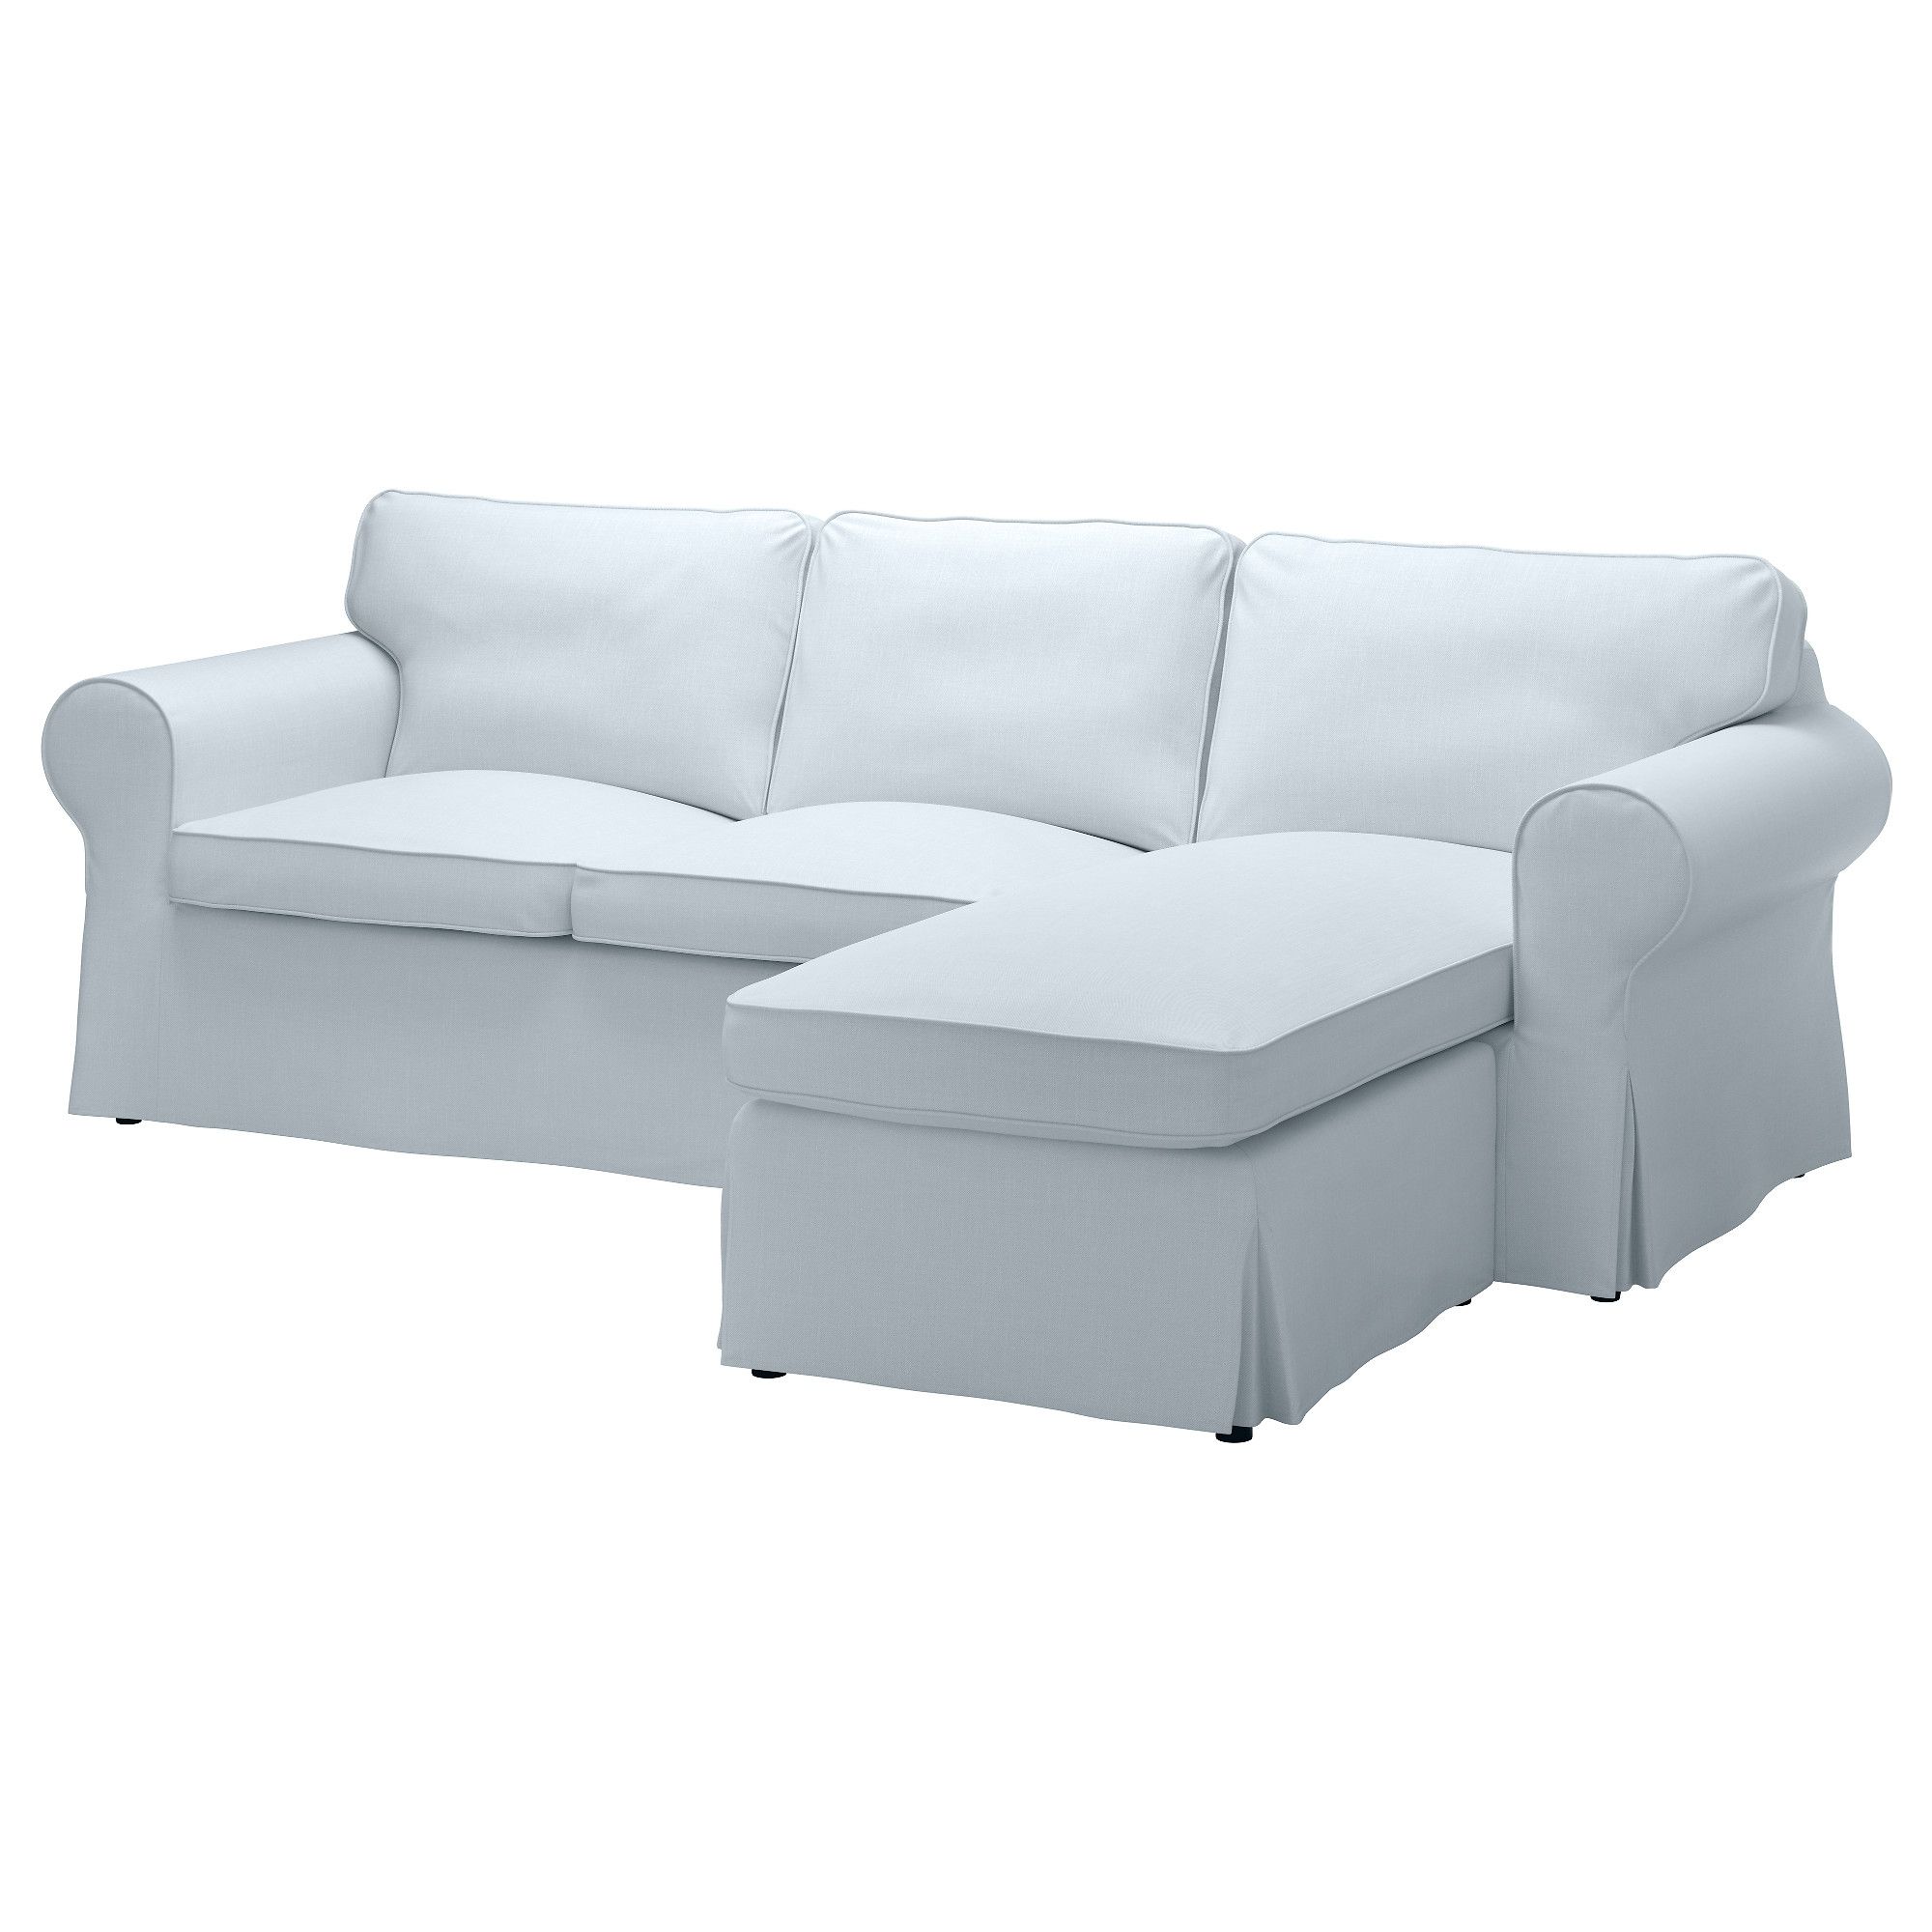 Small Sectional Sofa Ikea 80 With Small Sectional Sofa Ikea Regarding Sectional Sofas At Ikea (View 8 of 10)